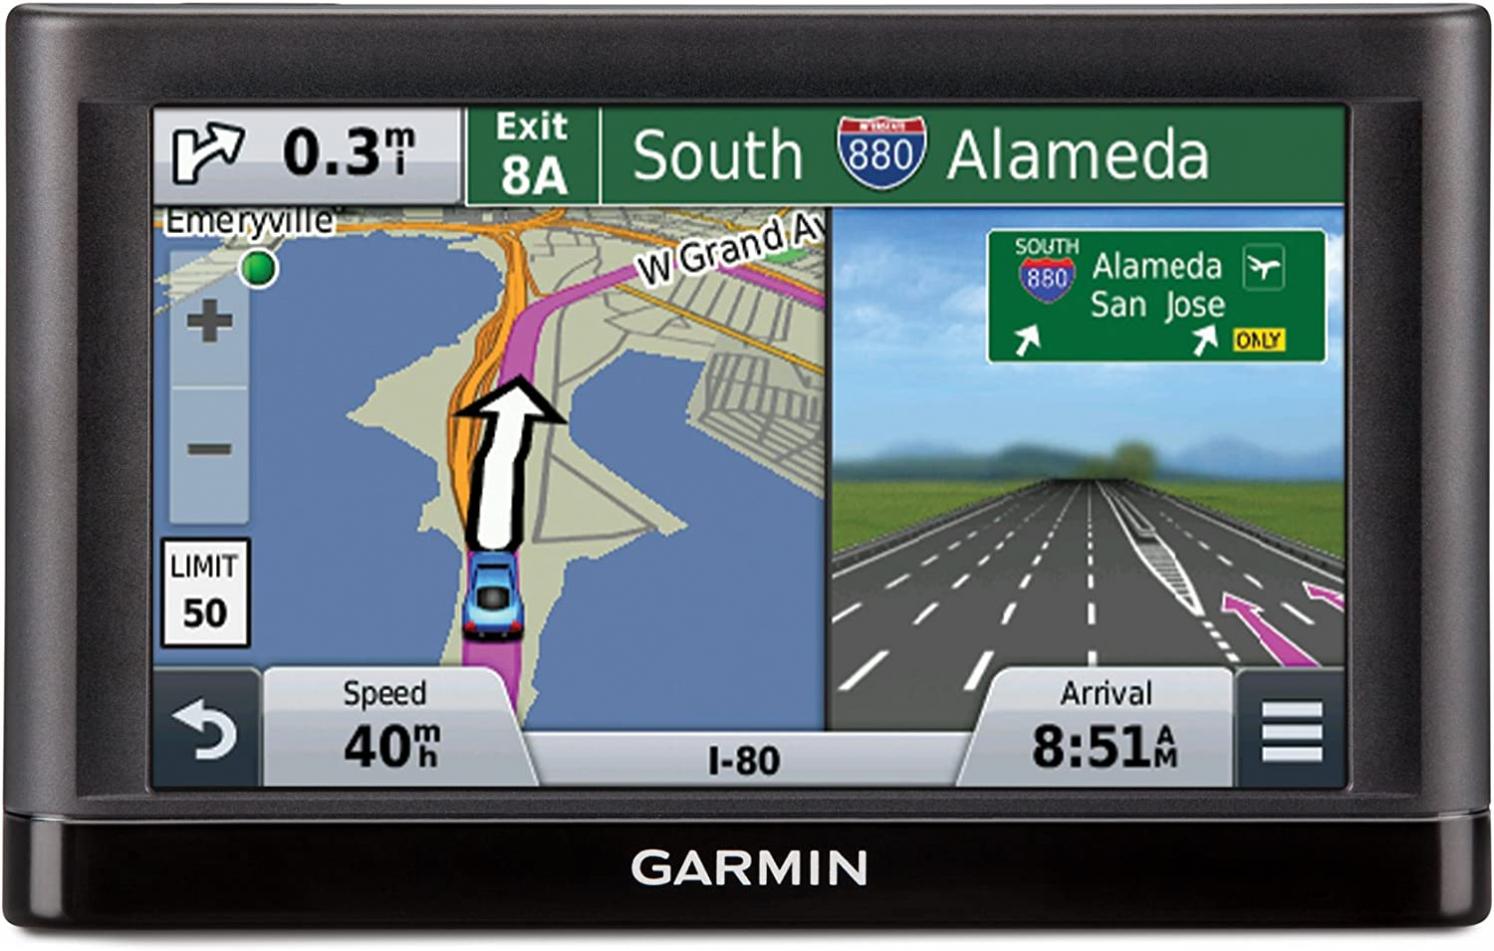 Garmin nüvi 55 GPS Navigators System with Spoken Turn-By-Turn Directions, Preloaded Maps and Speed Limit Displays (Lower 49 U.S. States)